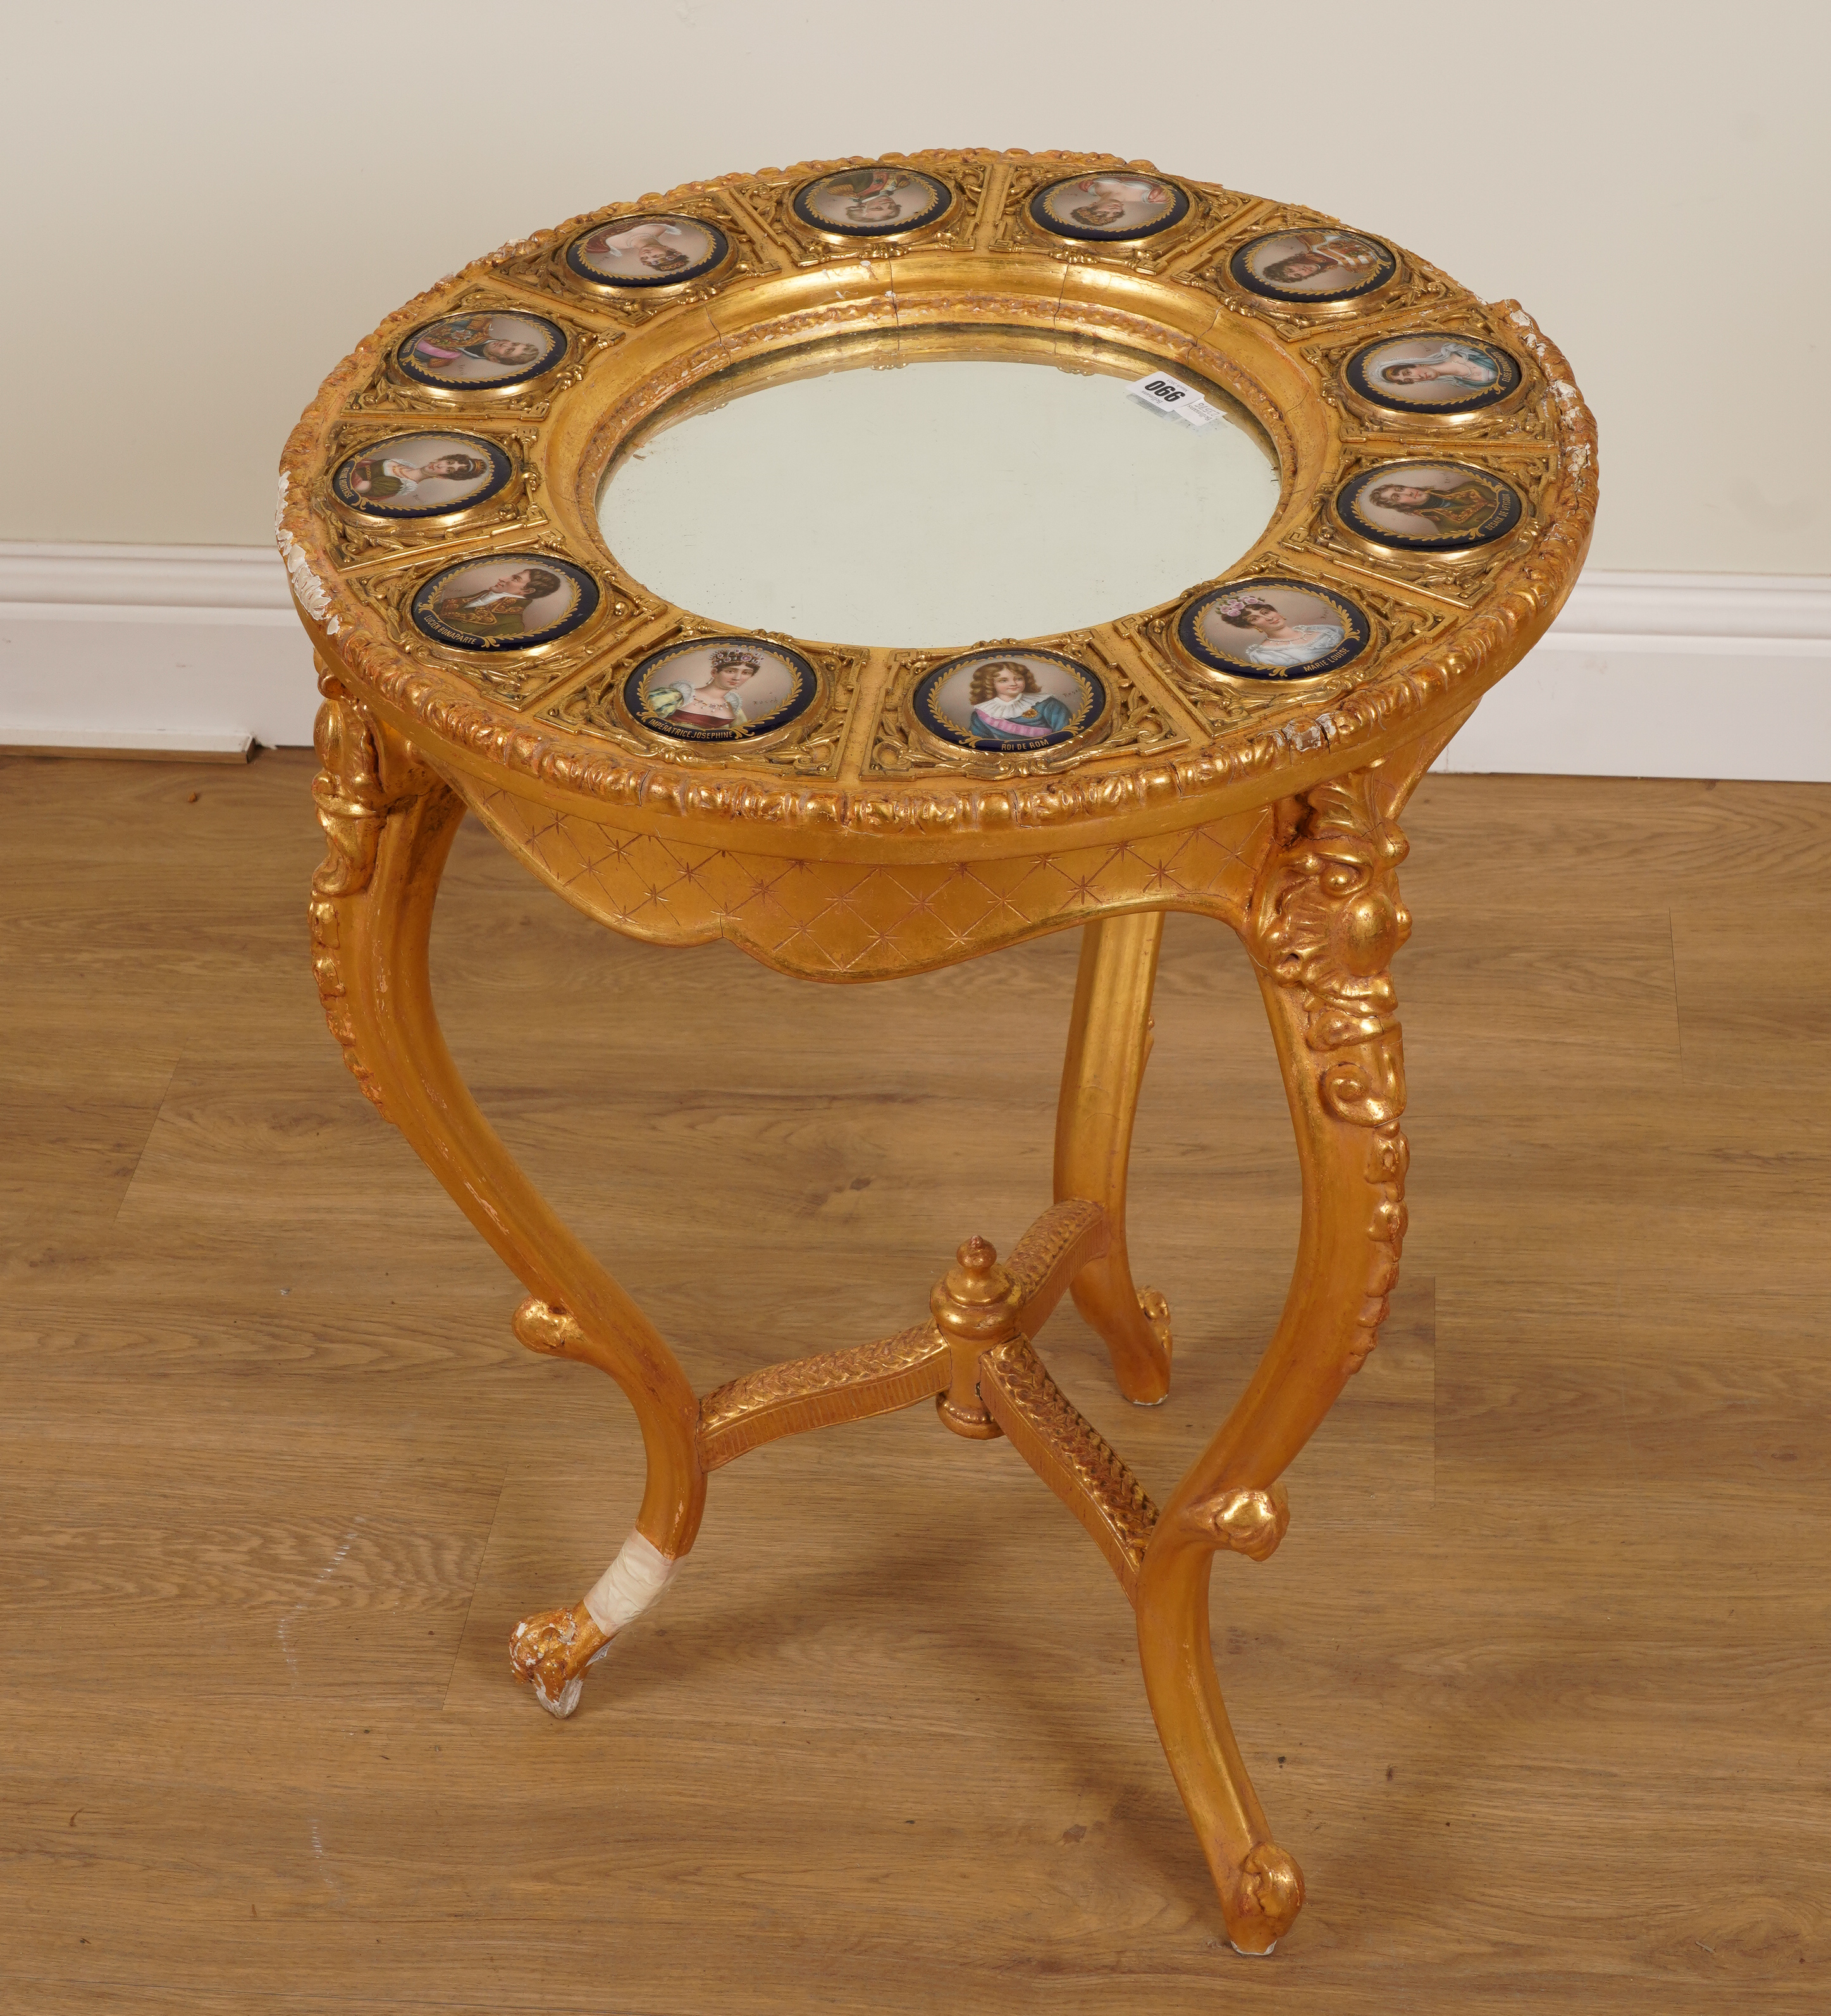 A LATE 19TH CENTURY FRENCH BRONZE AND PARIS PORCELAIN INSET GILT FRAMED TABLE - Image 2 of 8